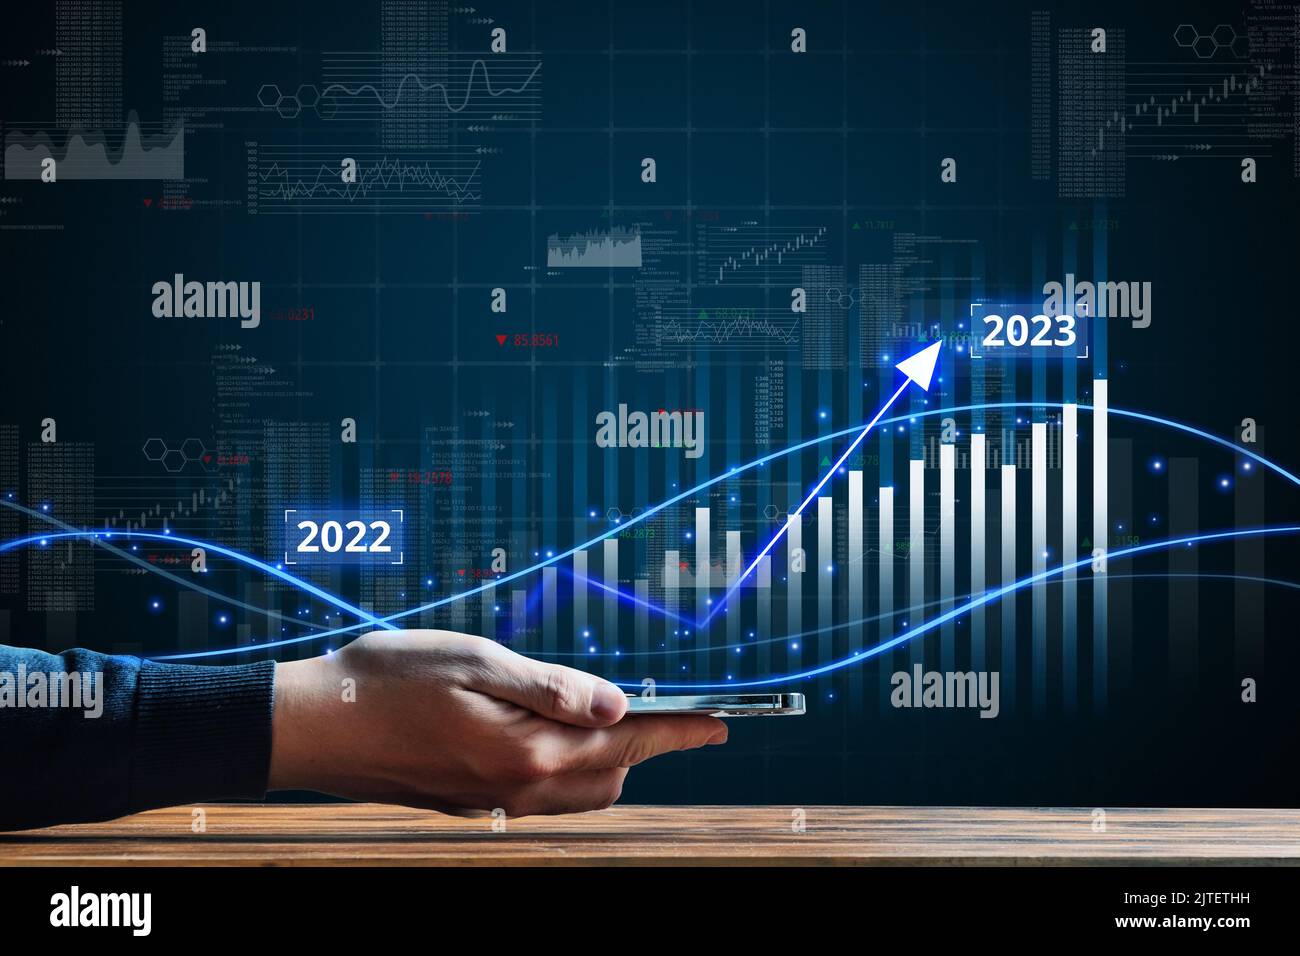 Business growth in 2023. Economic and financial growth. The person is holding smartphone with hologram. Stock Photo